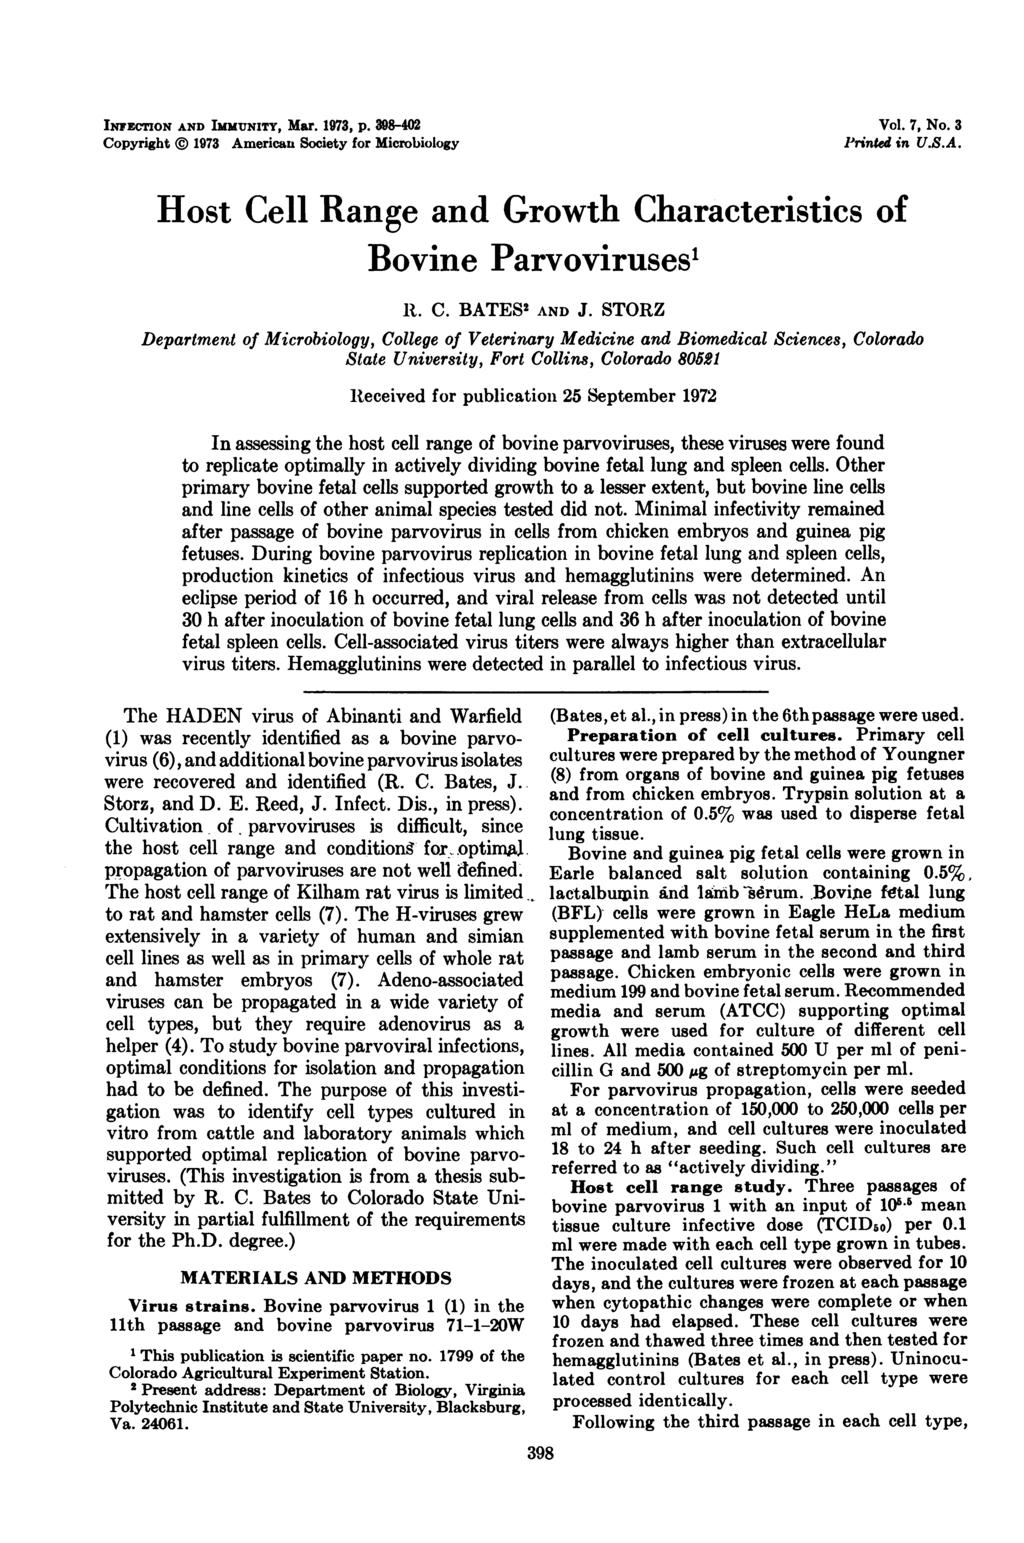 INFECTION AND IMMUNITY, Mar. 1973, p. 398-4 Copyright 1973 Americau Society for Microbiology Vol. 7, No. 3 Printed in U.S.A. Host Cell Range and Growth Characteristics of Bovine Parvoviruses' R. C. BATES' AND J.